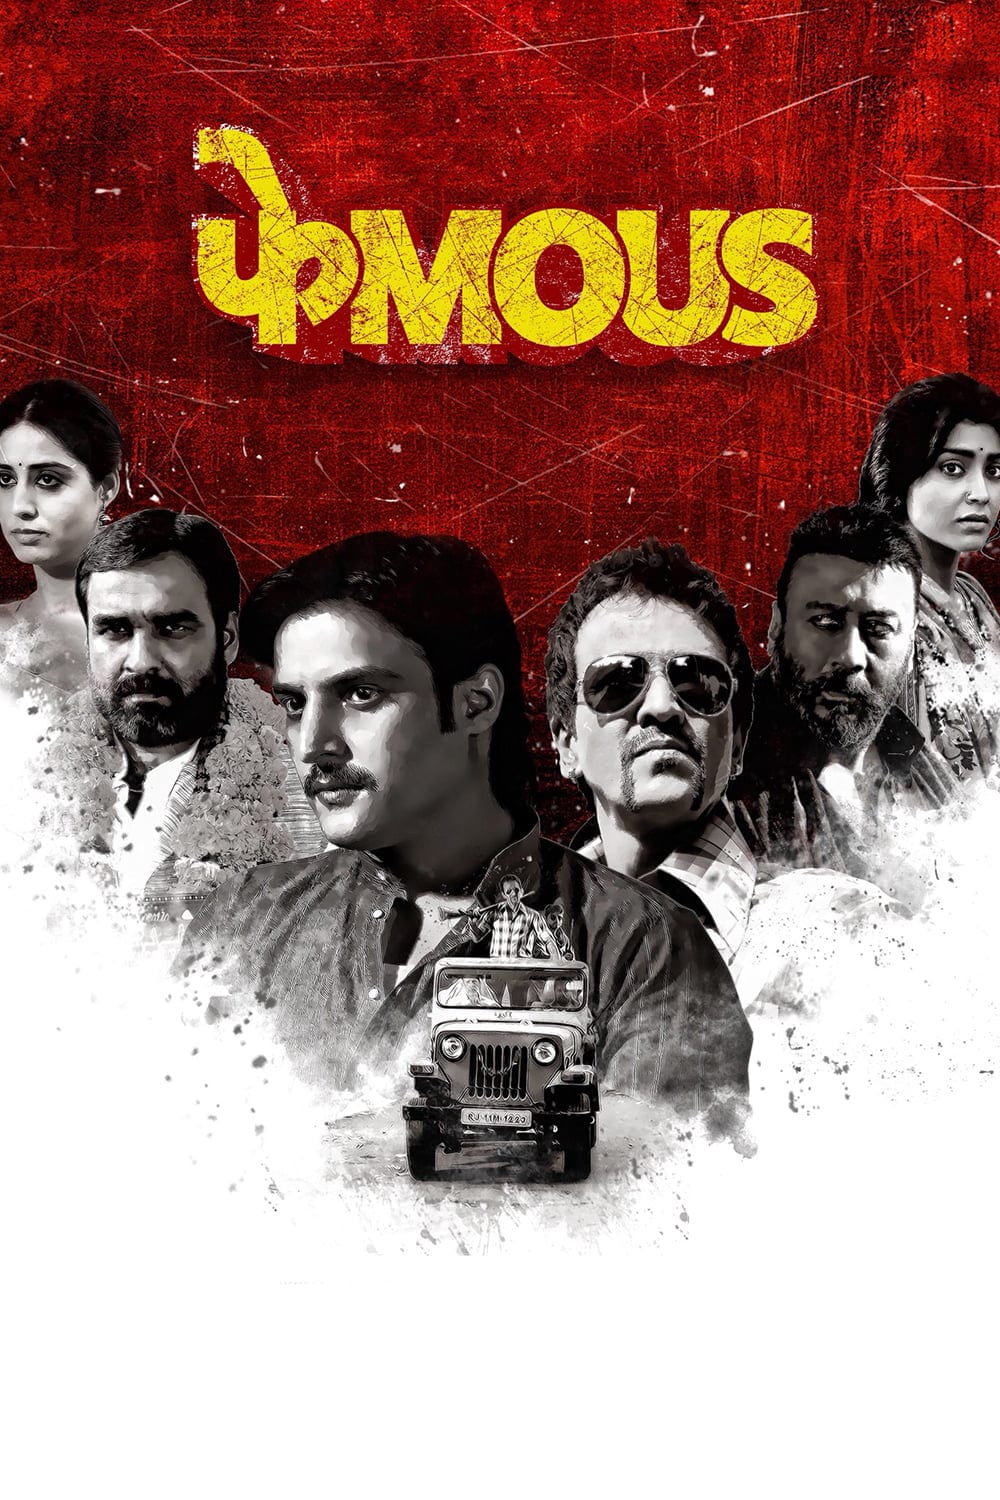 Poster for the movie "Phamous"